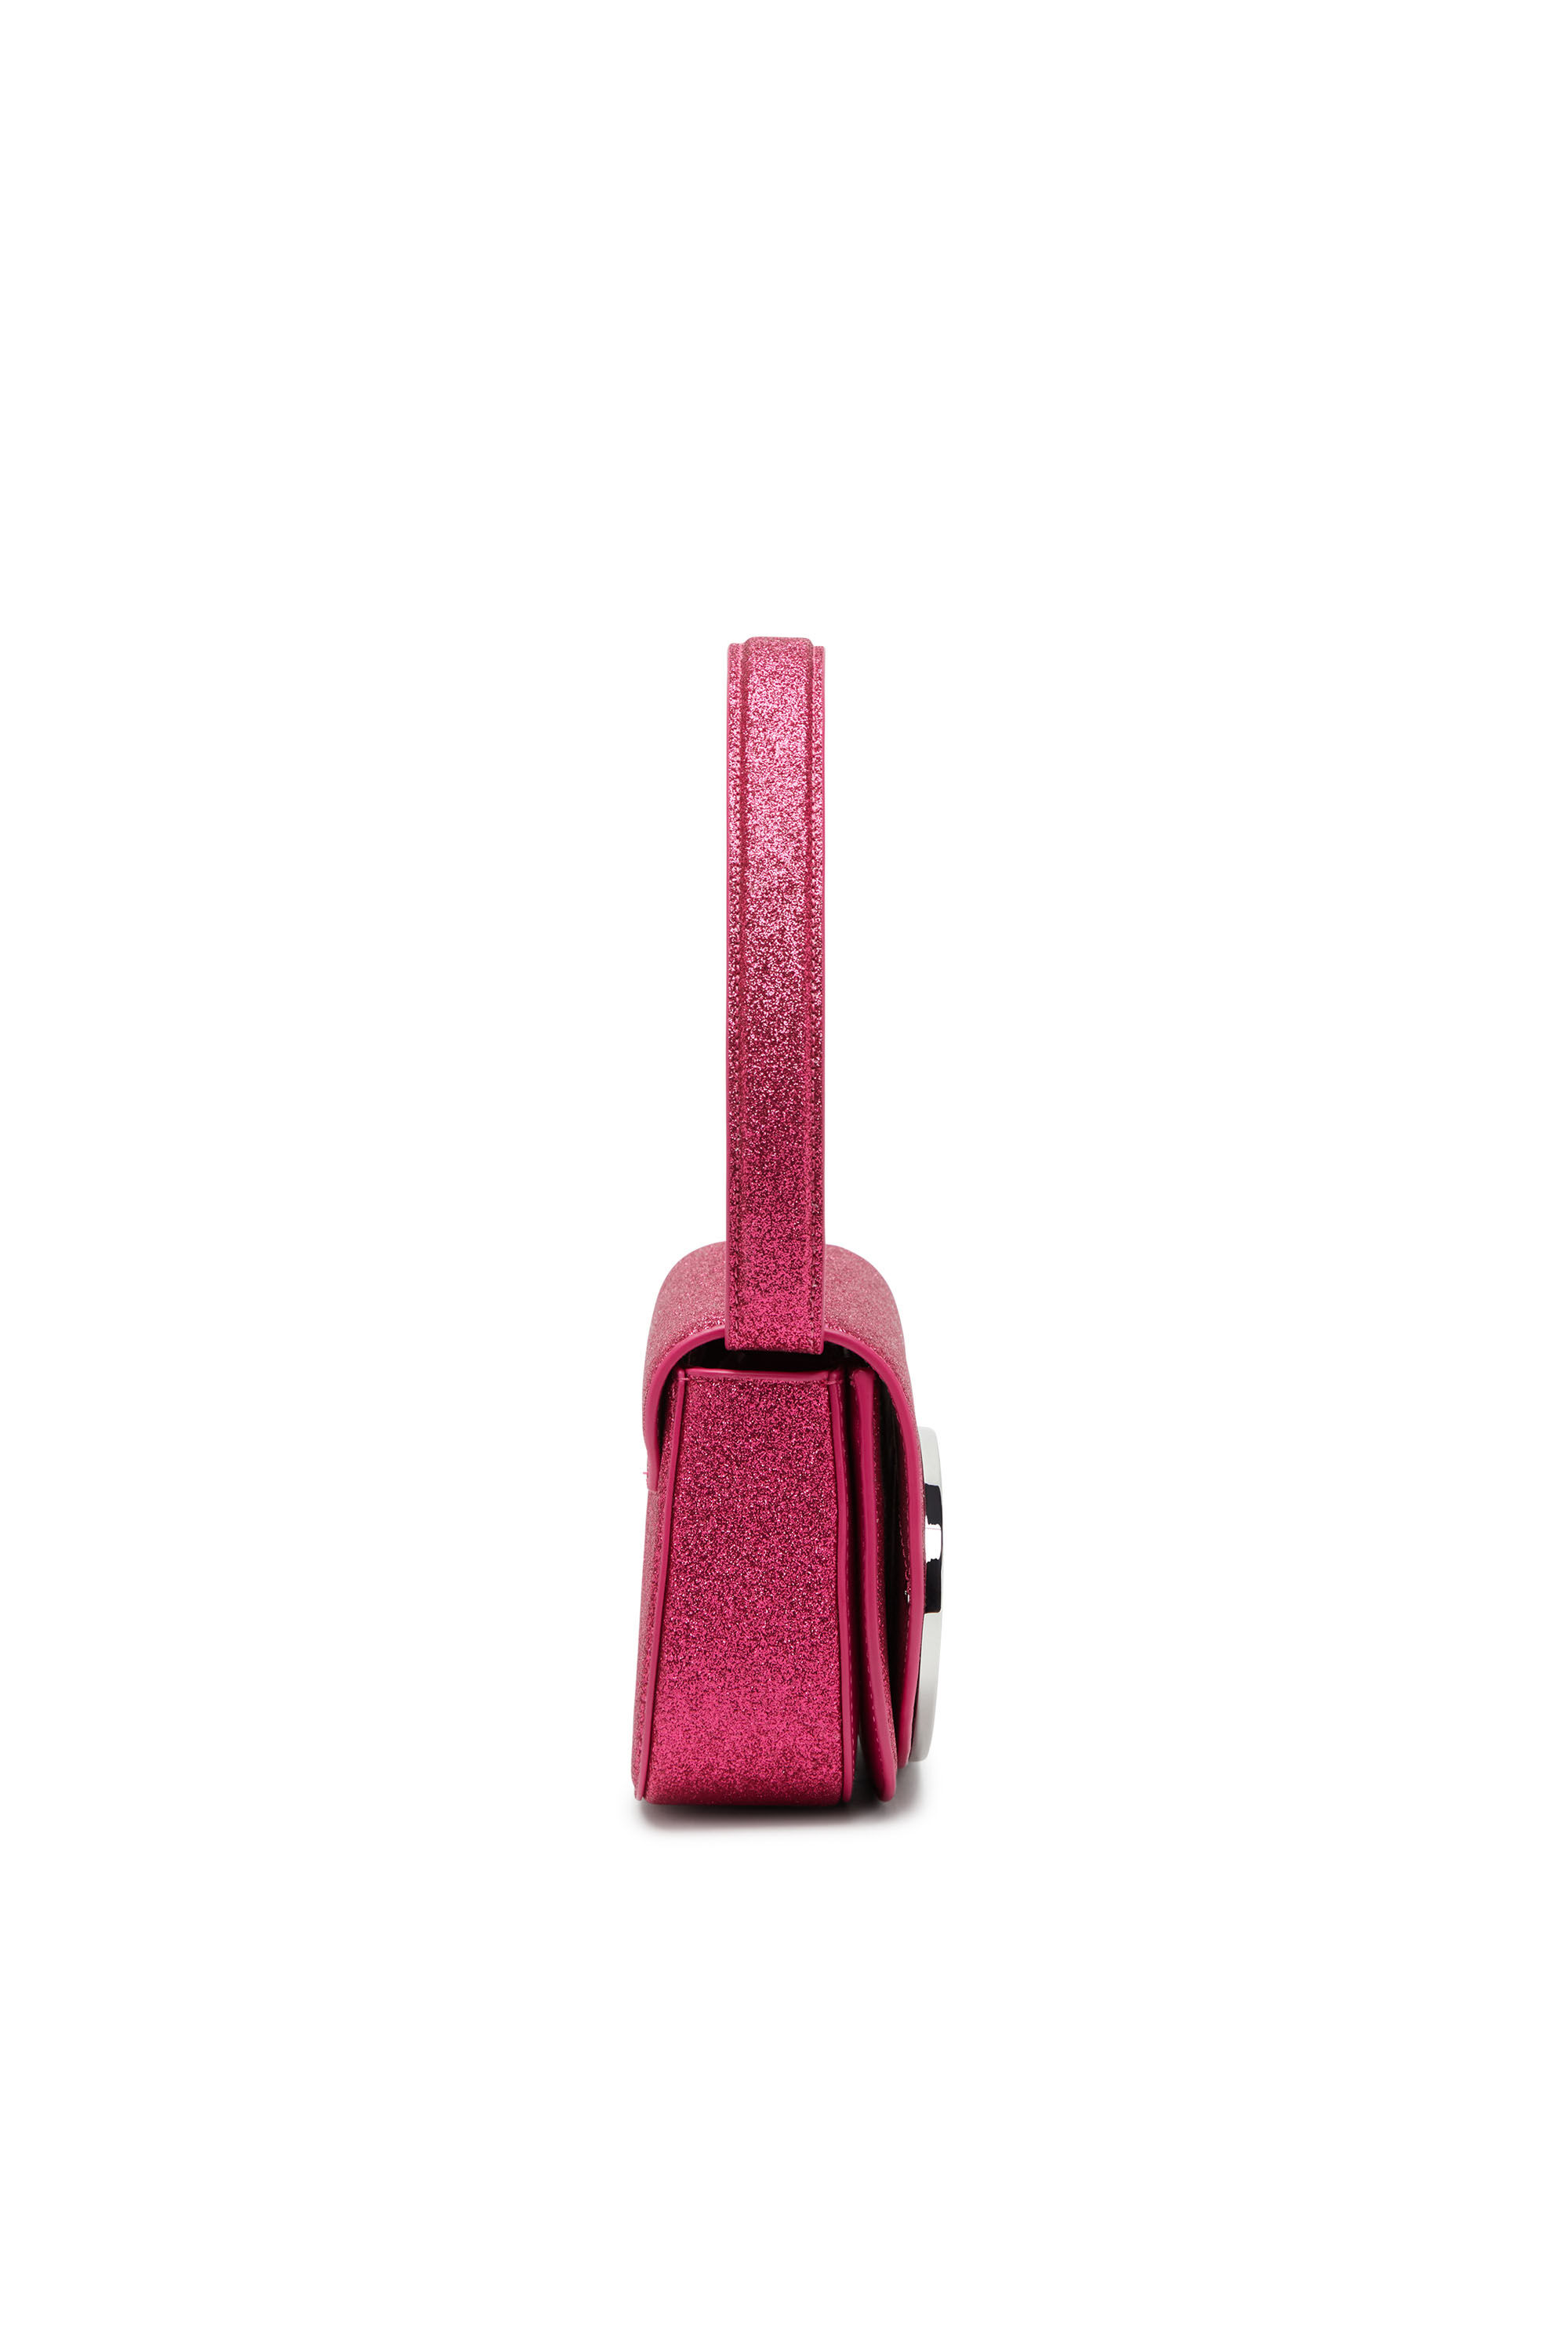 Diesel - 1DR, Woman 1DR-Iconic shoulder bag in glitter fabric in Pink - Image 4